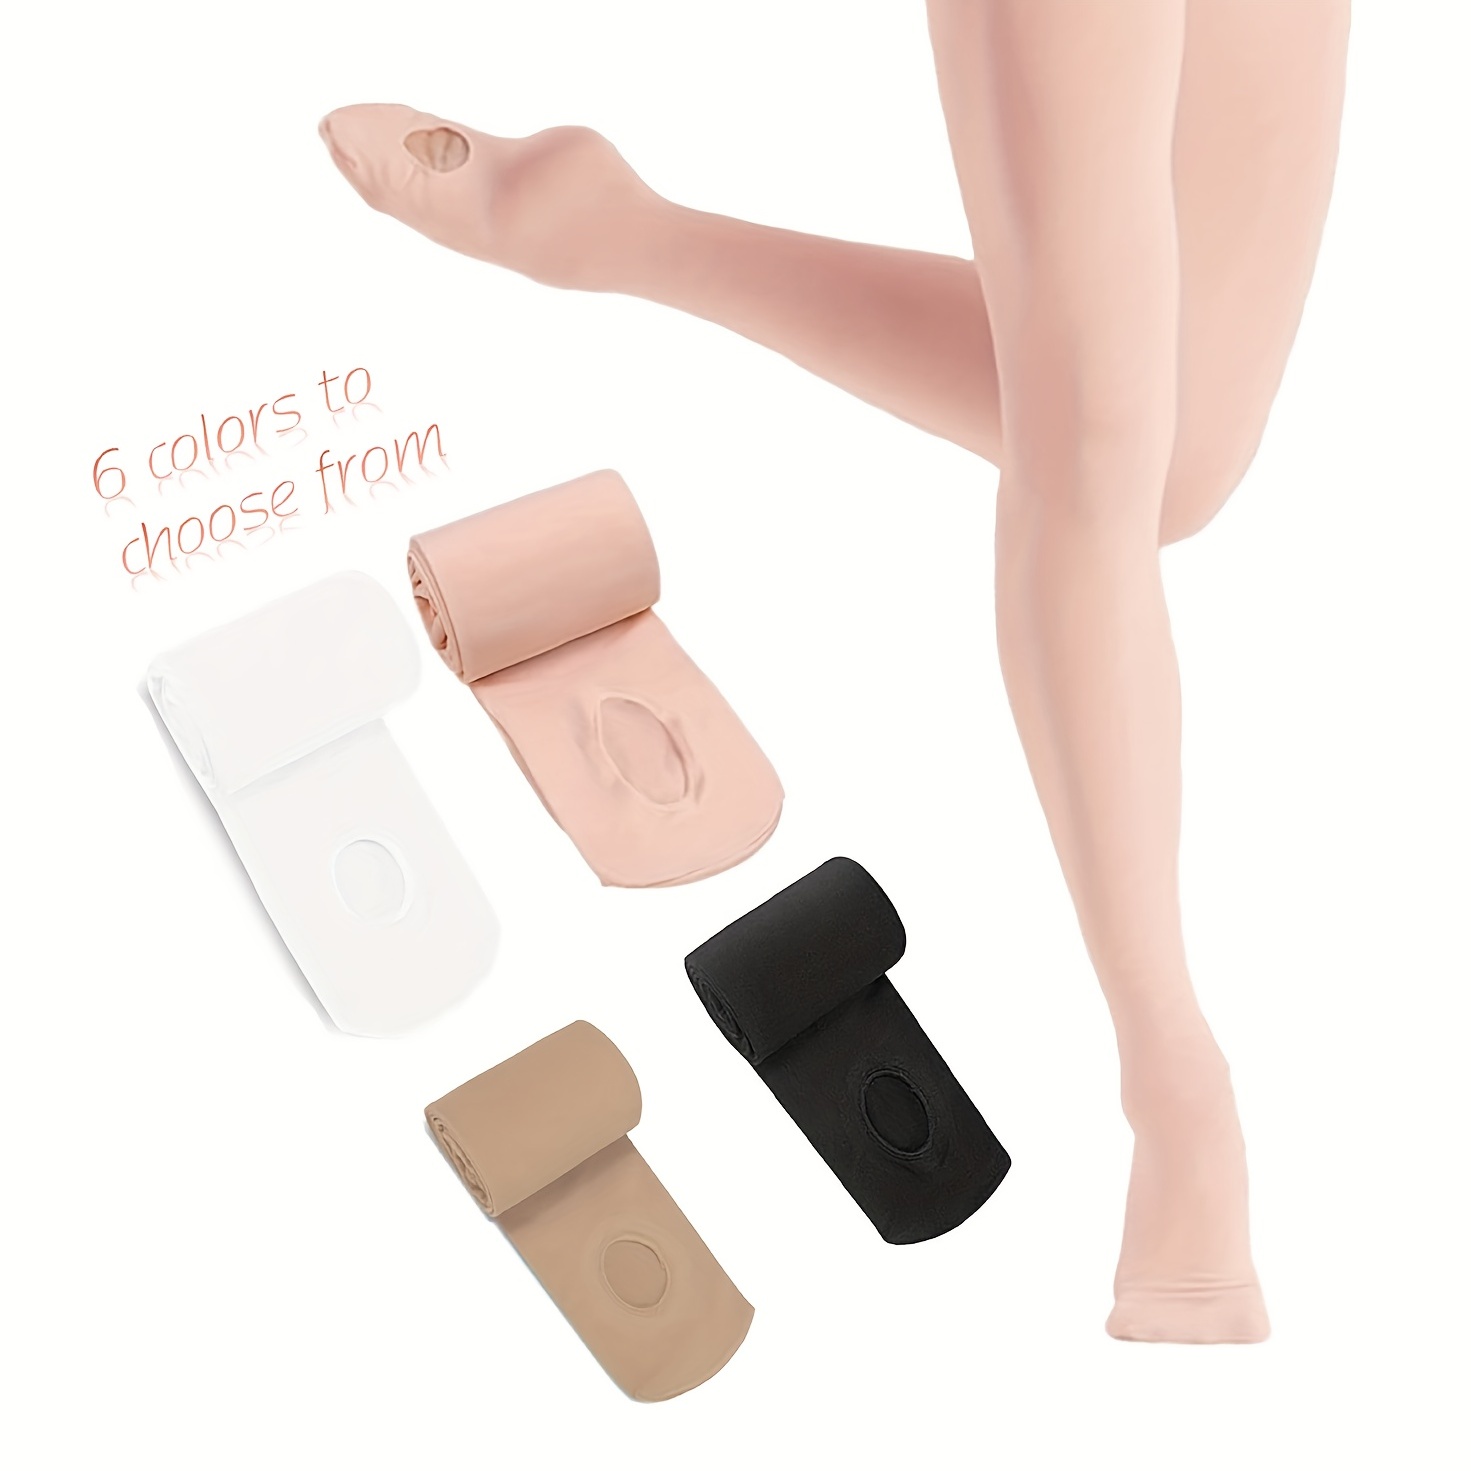  3 Pairs Girls Convertible Ballet Tights Soft Transition  Dance Tight Toddler Footless Pantyhose